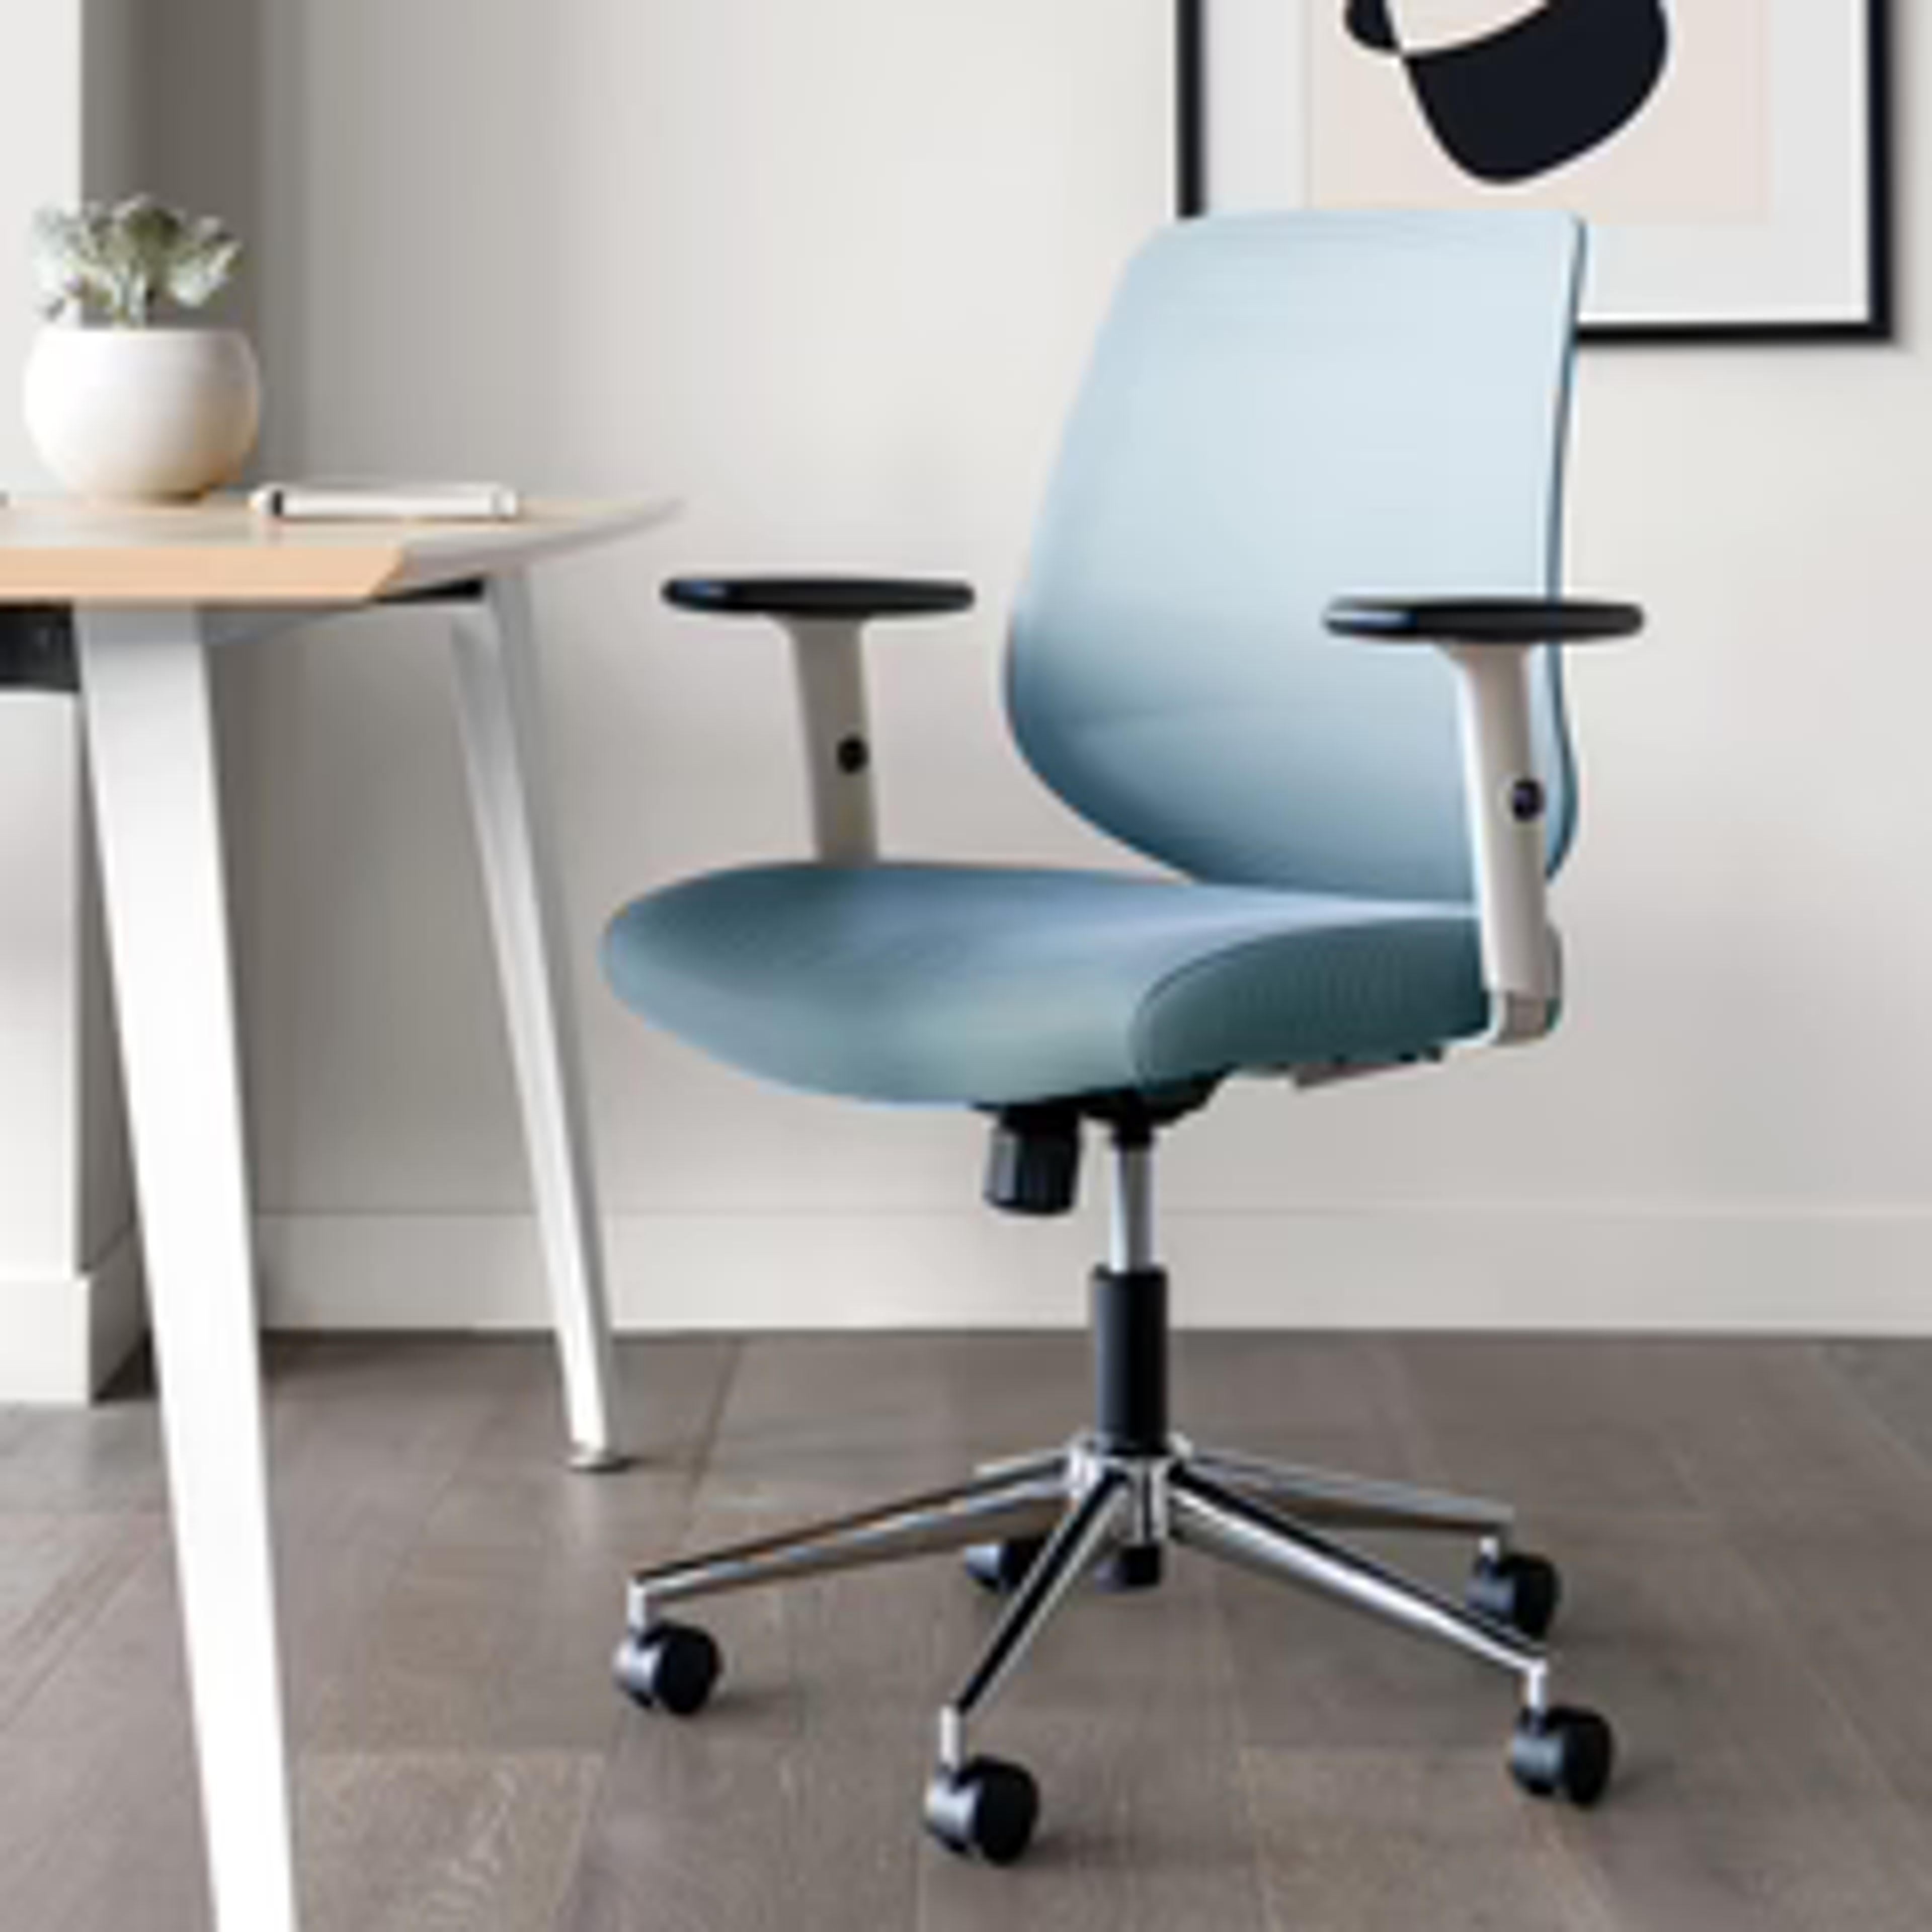 Daily Chair | Home Office Chair | Branch